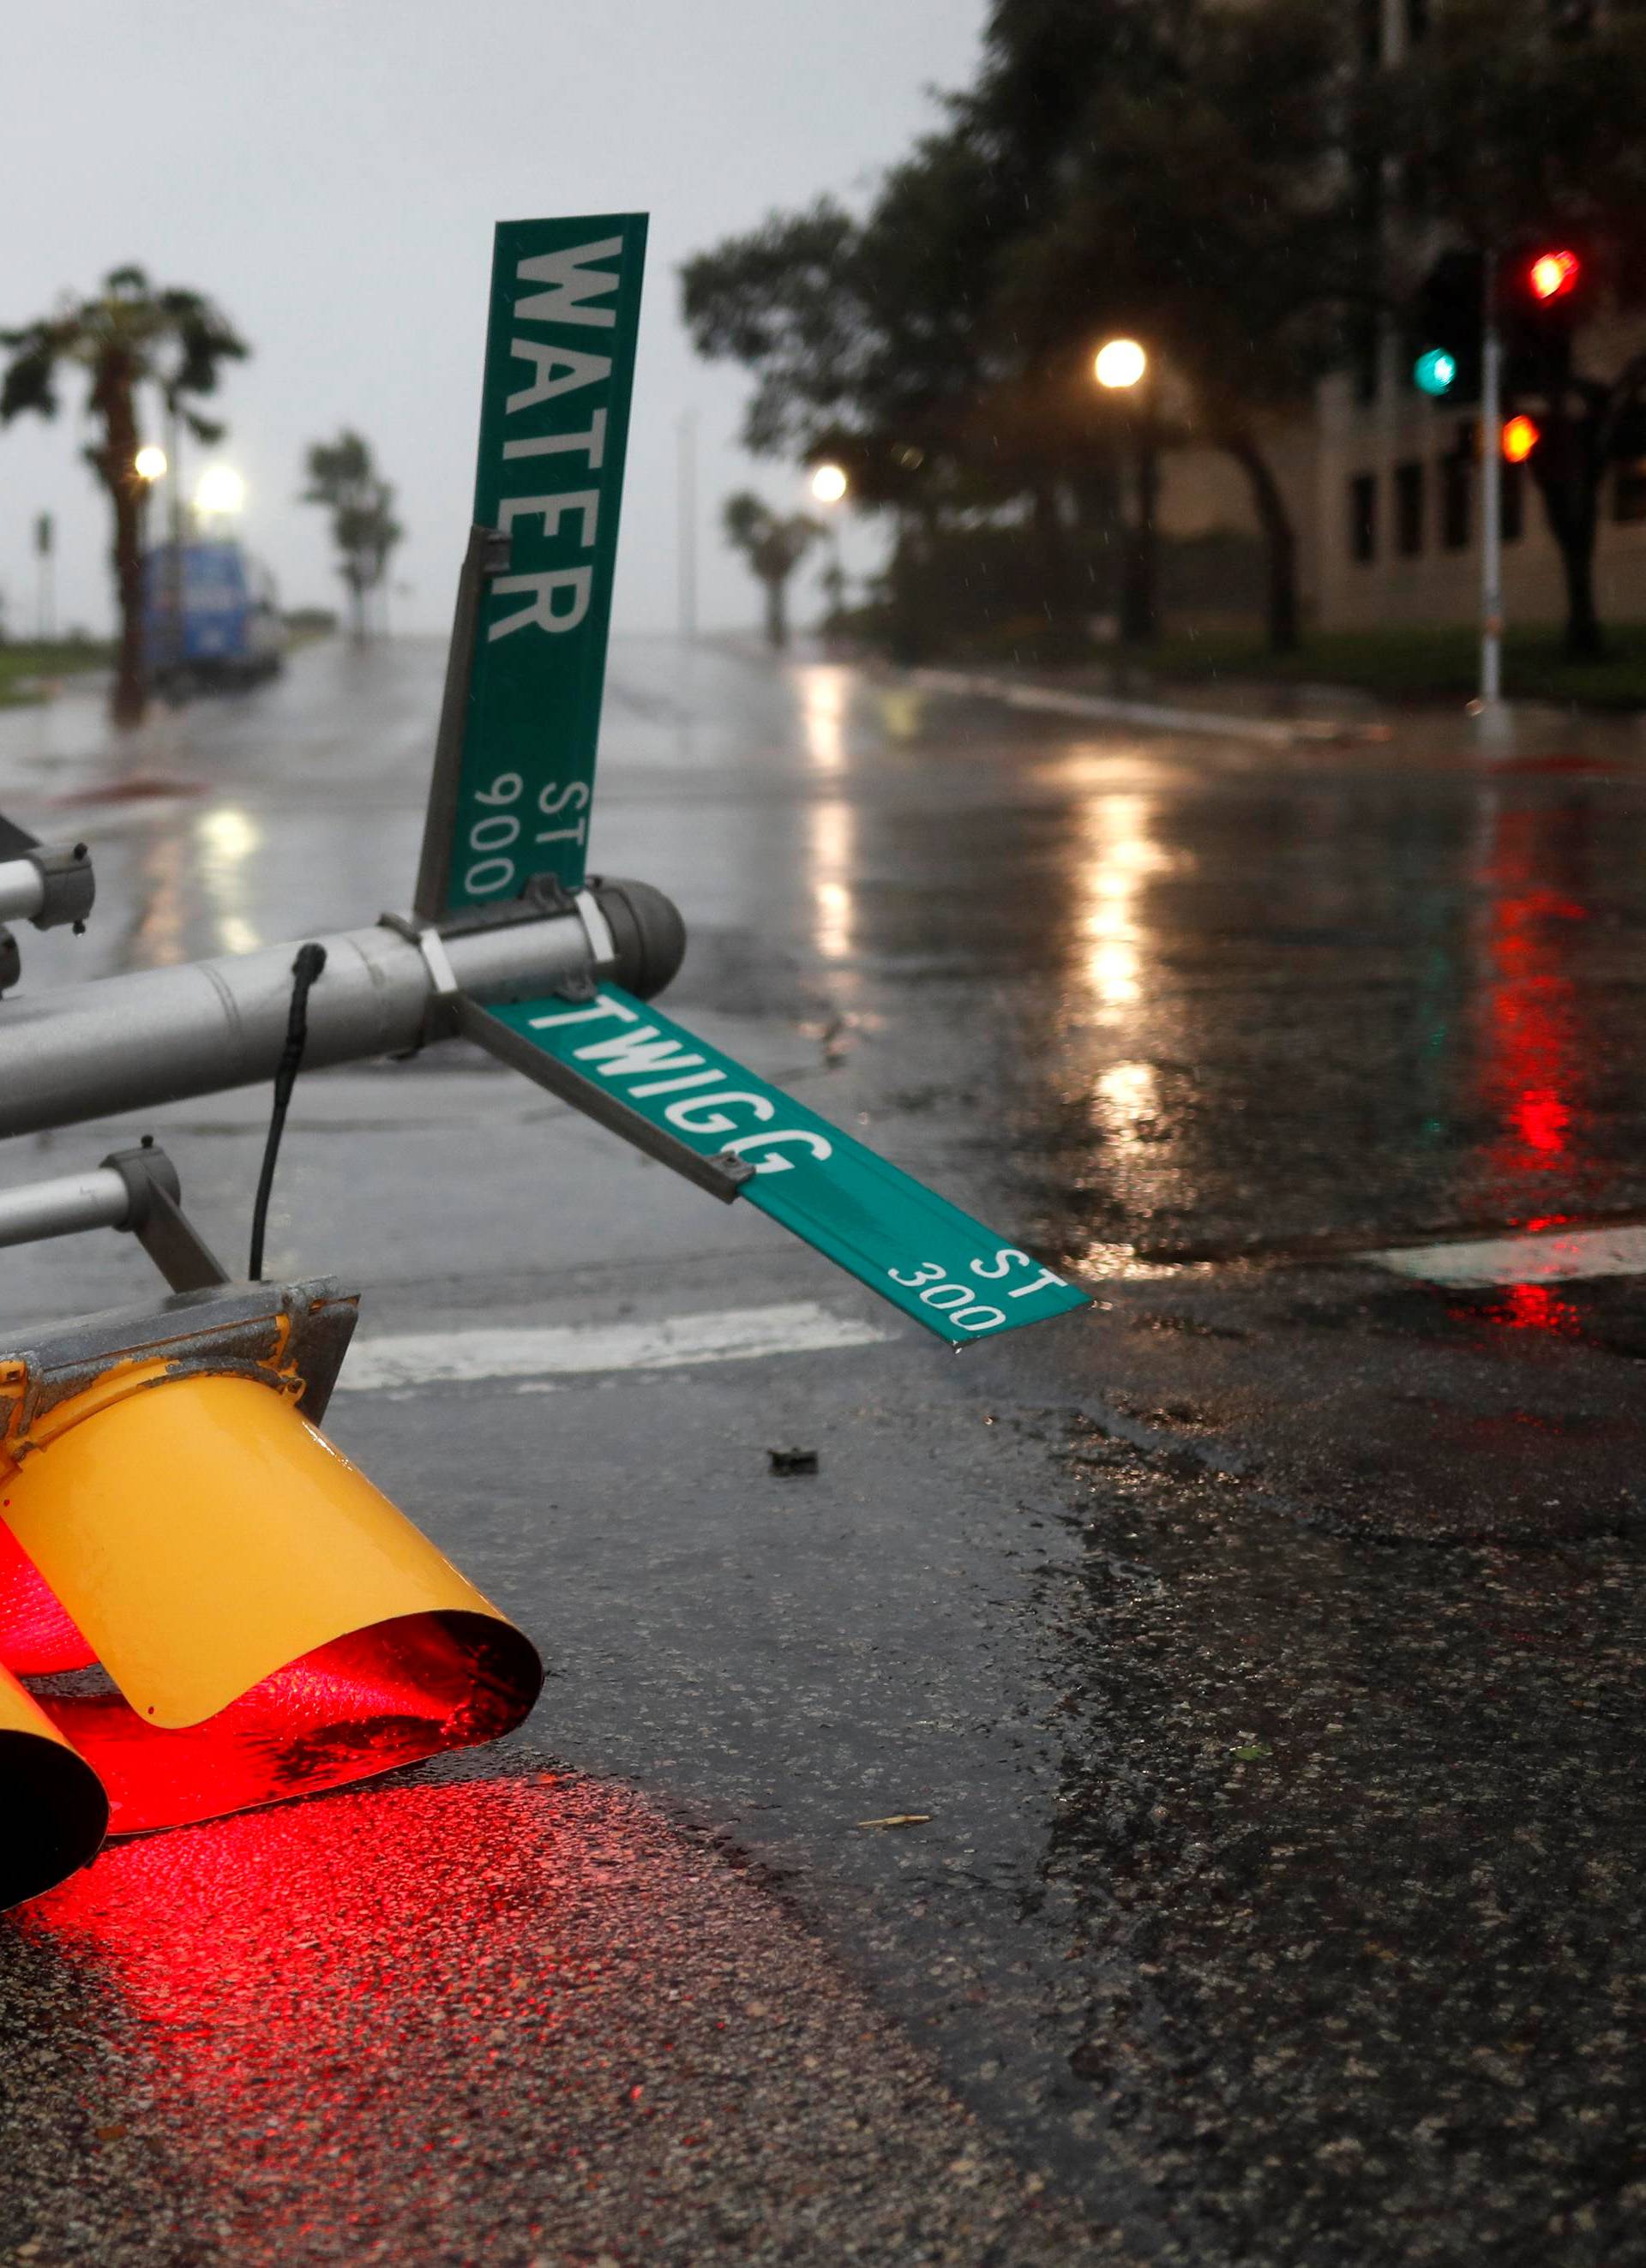 Traffic lights lie on a street after being knocked down, as Hurricane Harvey approaches in Corpus Christi